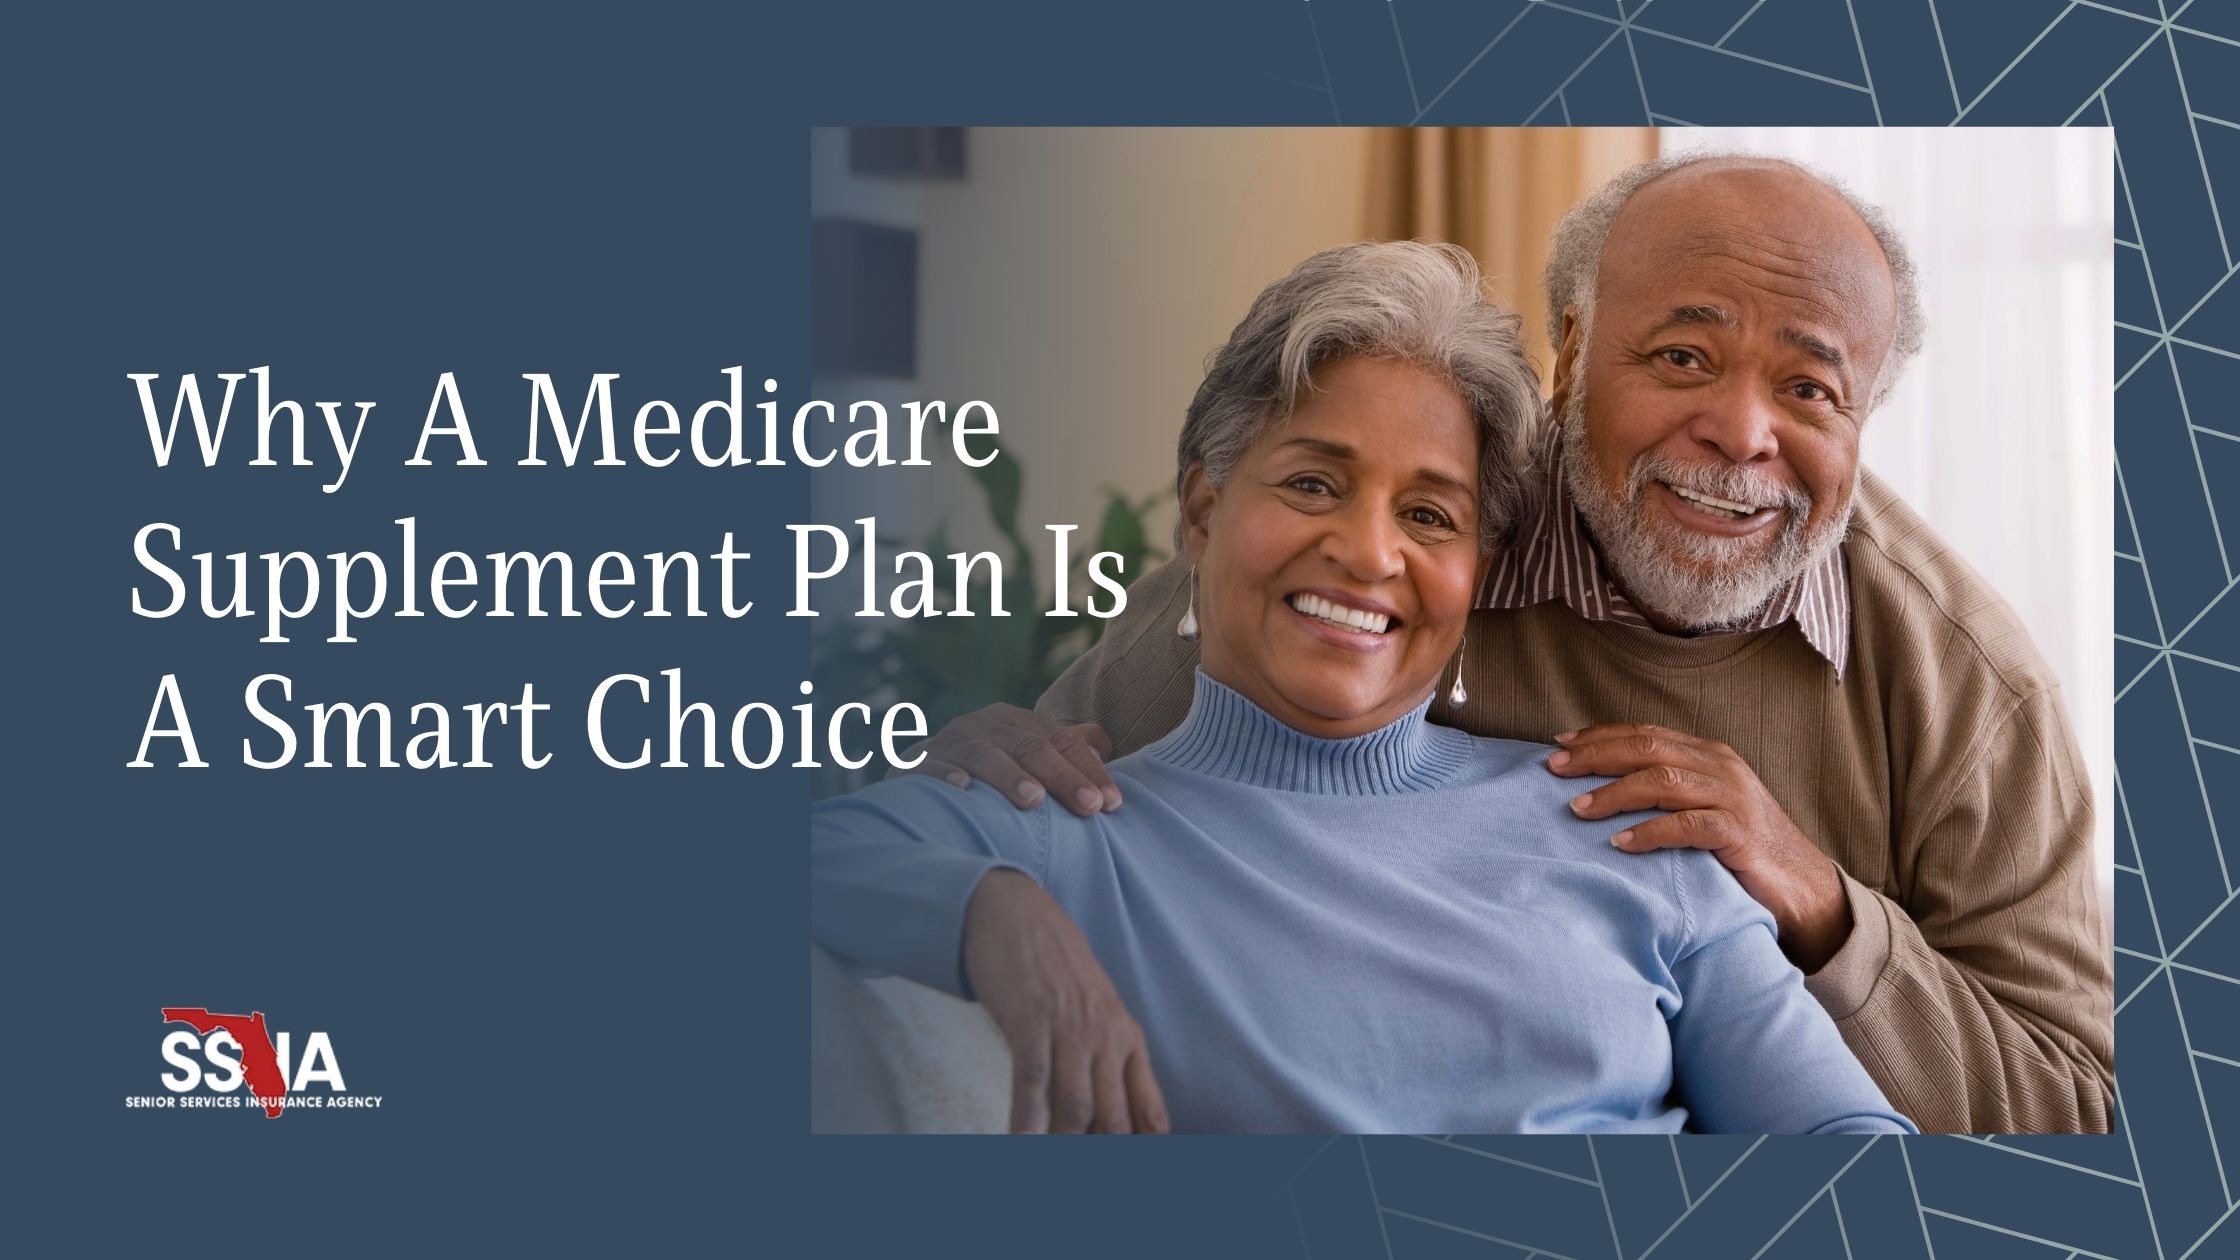 Medicare Supplement Plan is a Smart Choice